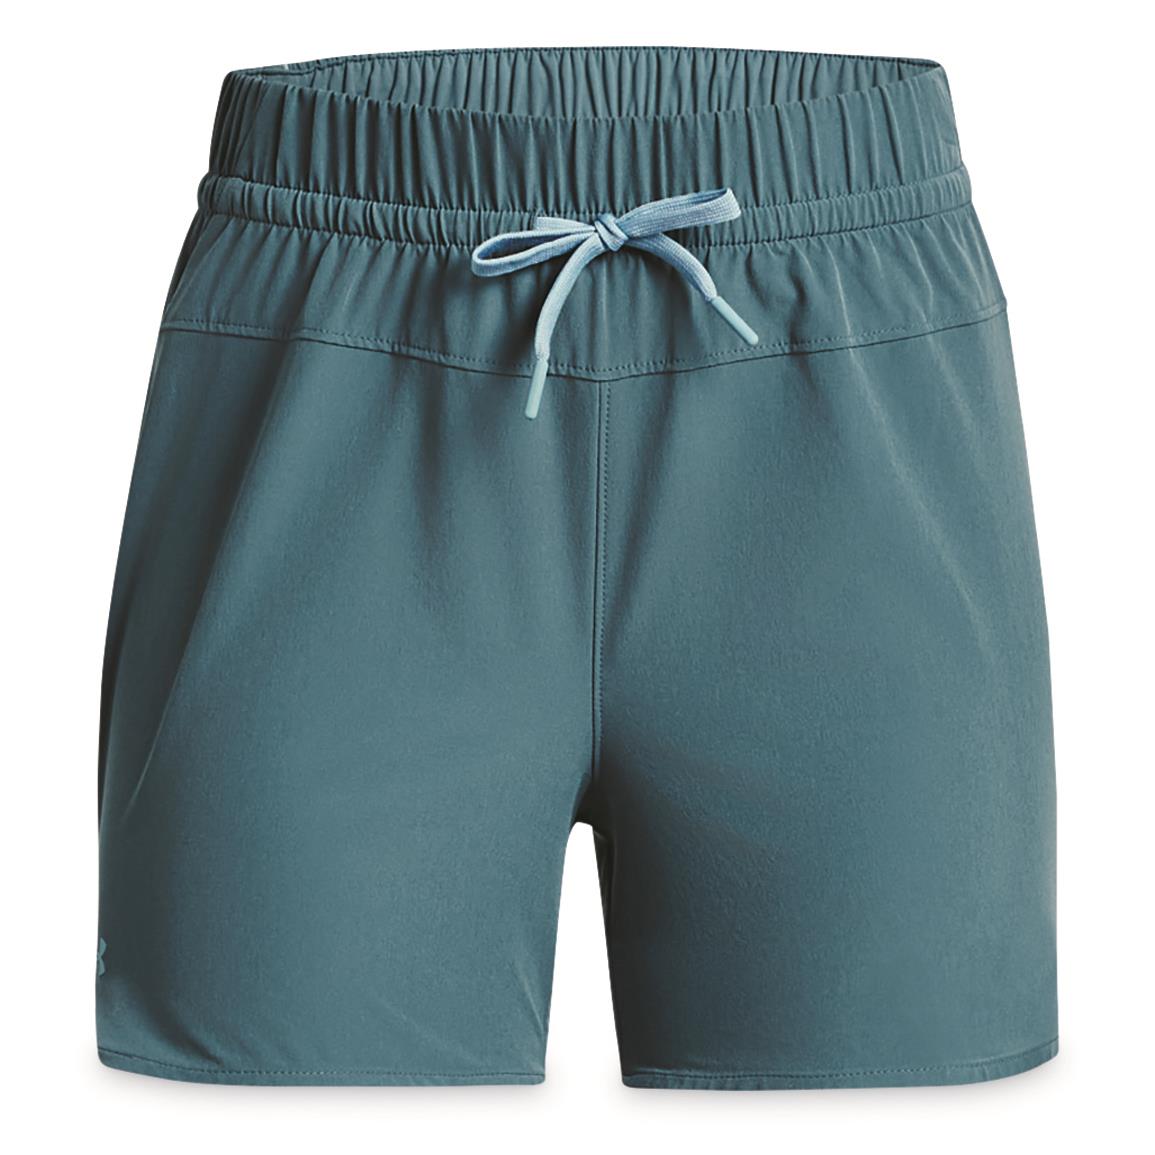 Under Armour Women's Fusion Shorts, Solid, Static Blue/still Water